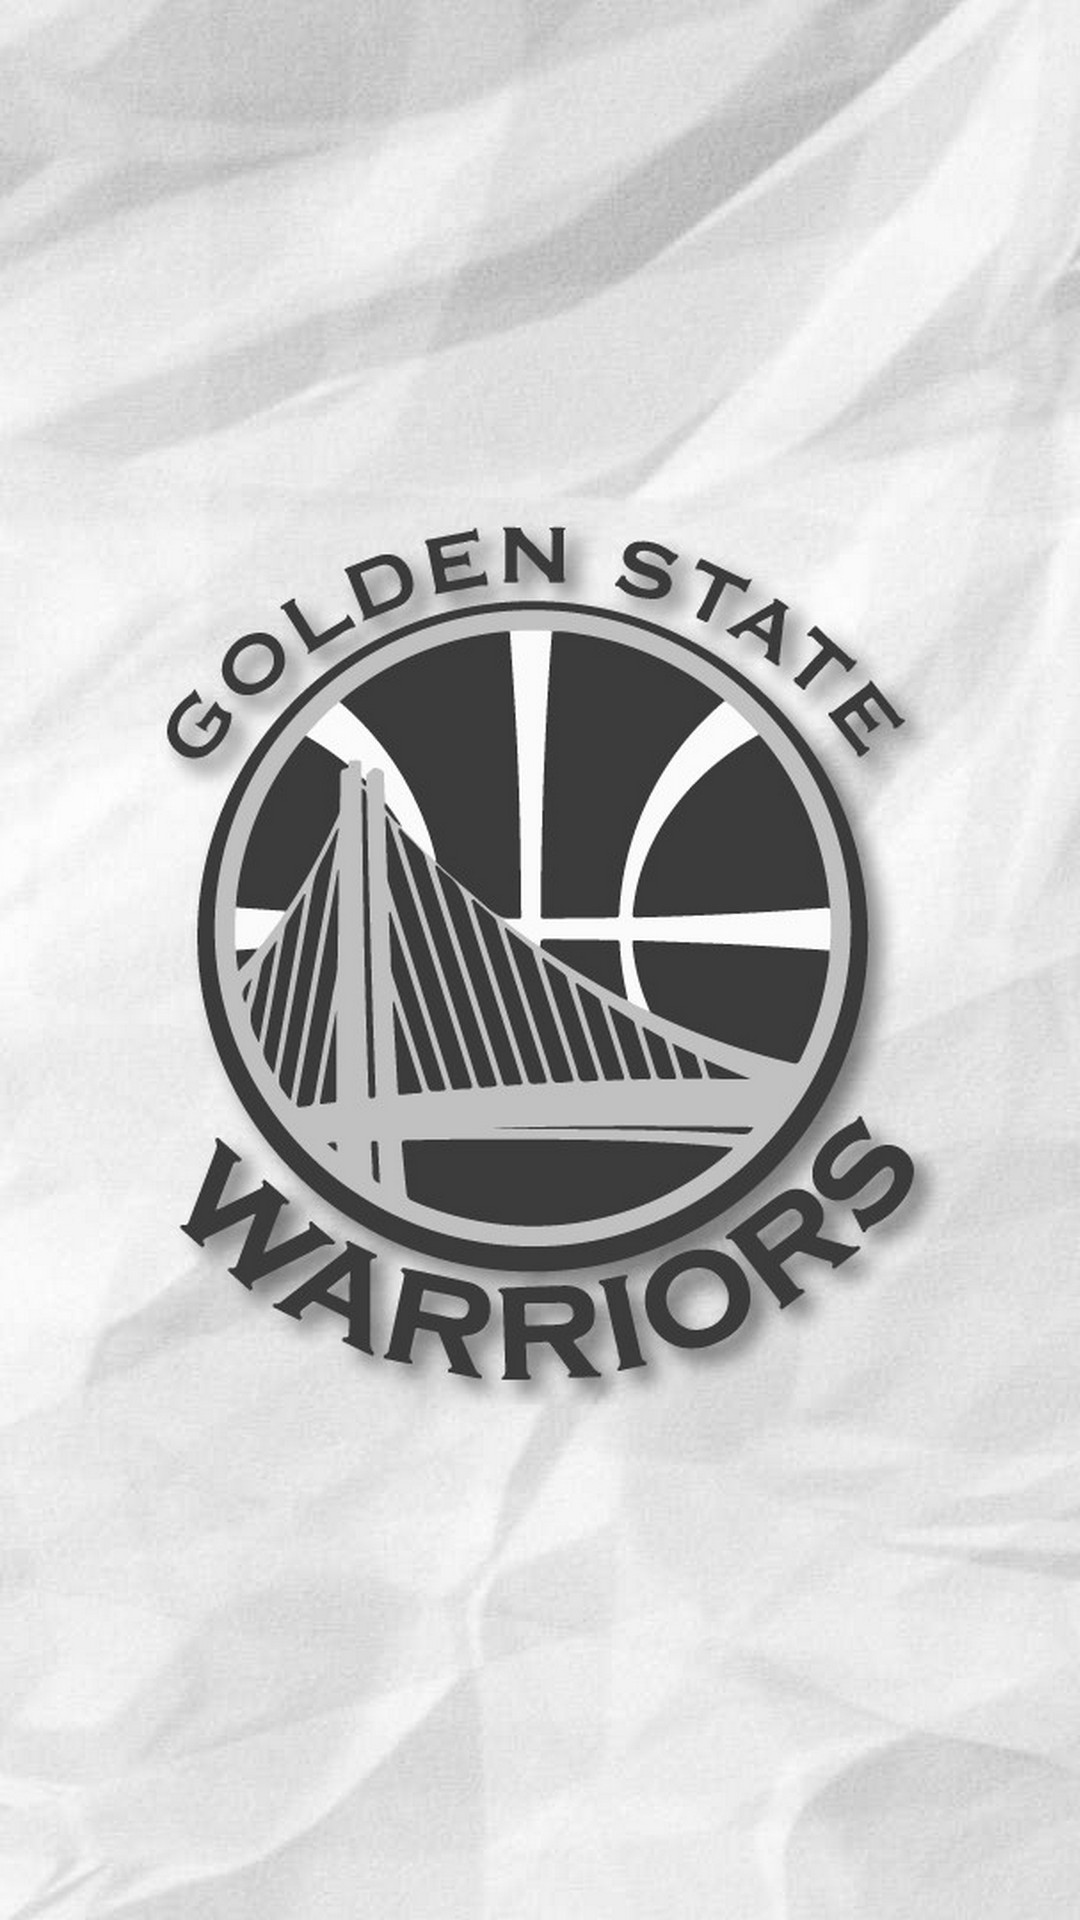 iPhone 7 Wallpaper Golden State Warriors with resolution 1080X1920 pixel. You can make this wallpaper for your iPhone 5, 6, 7, 8, X backgrounds, Mobile Screensaver, or iPad Lock Screen